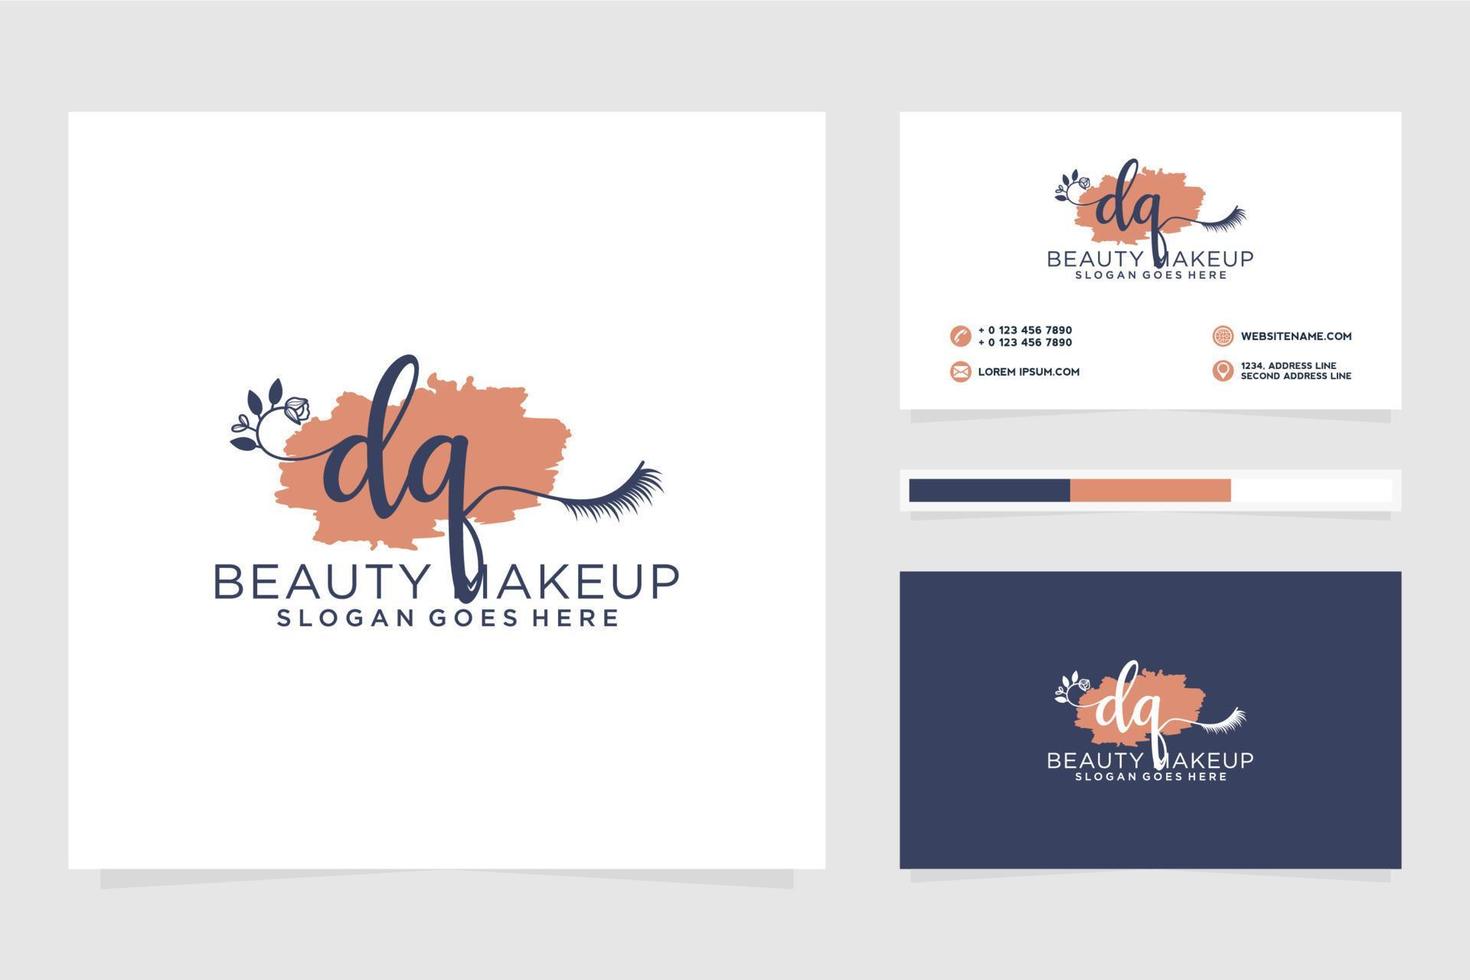 Initial DQ Feminine logo collections and business card templat Premium Vector